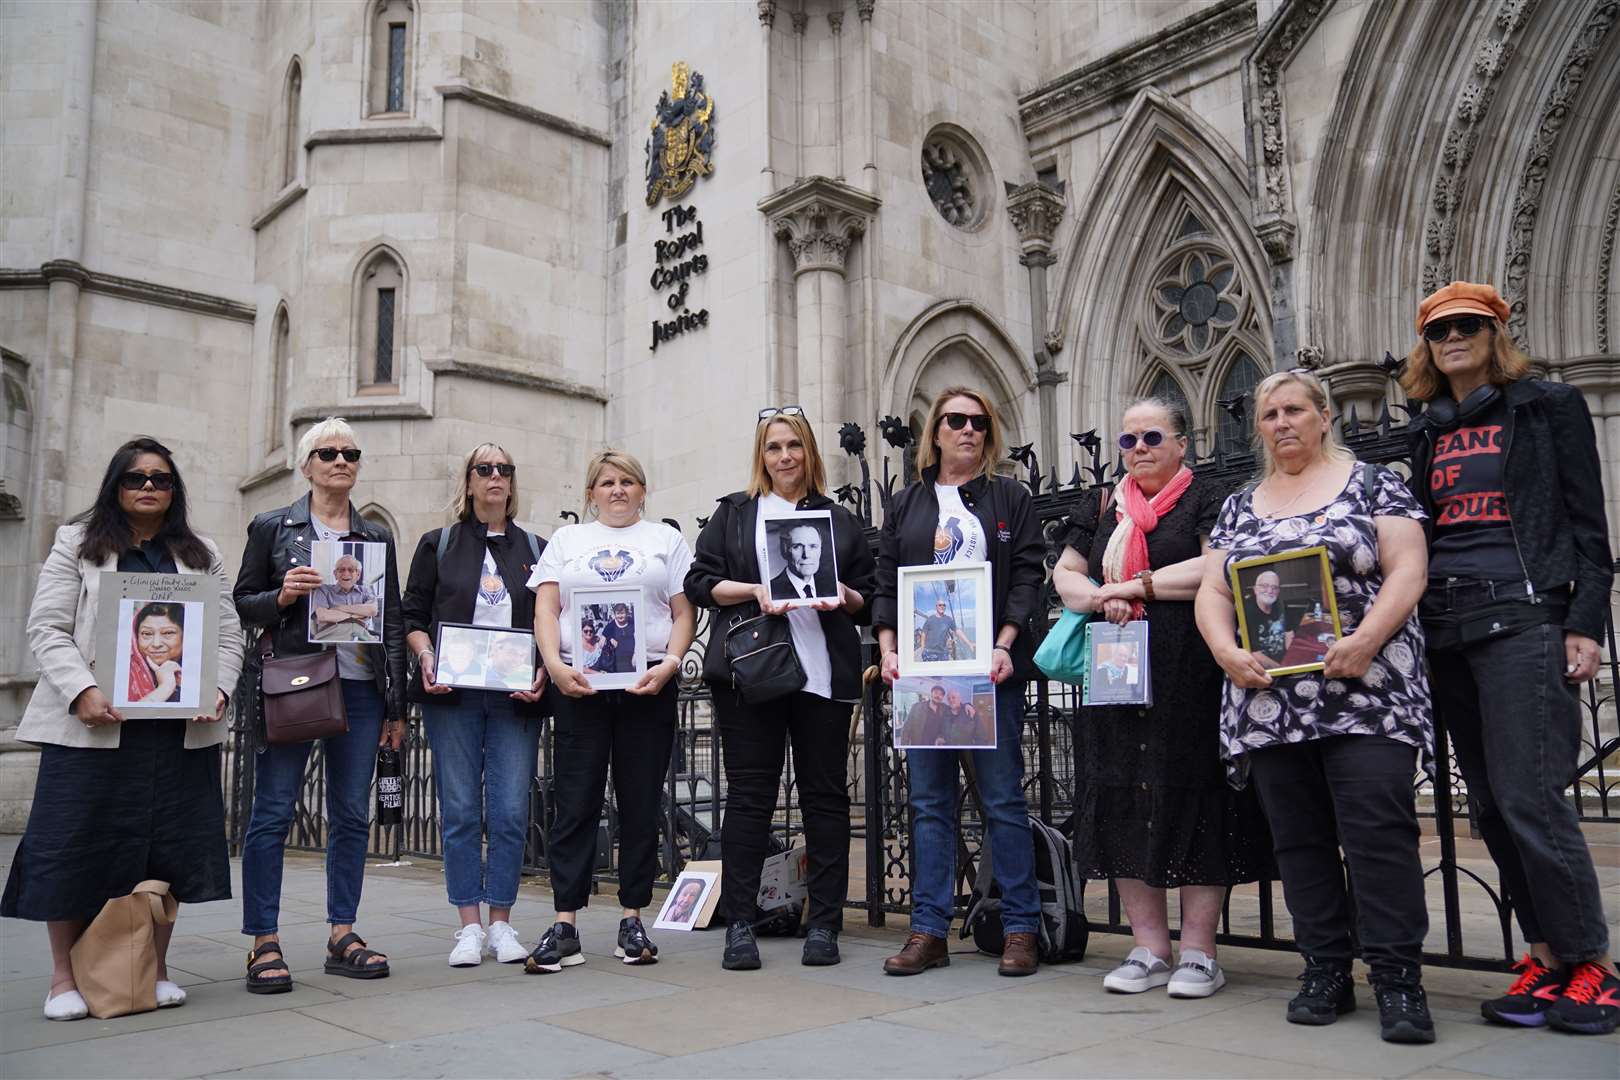 Campaigners held up pictures of their relatives that died during the pandemic ahead of the hearing at the Royal Courts of Justice in London (Lucy North/PA)